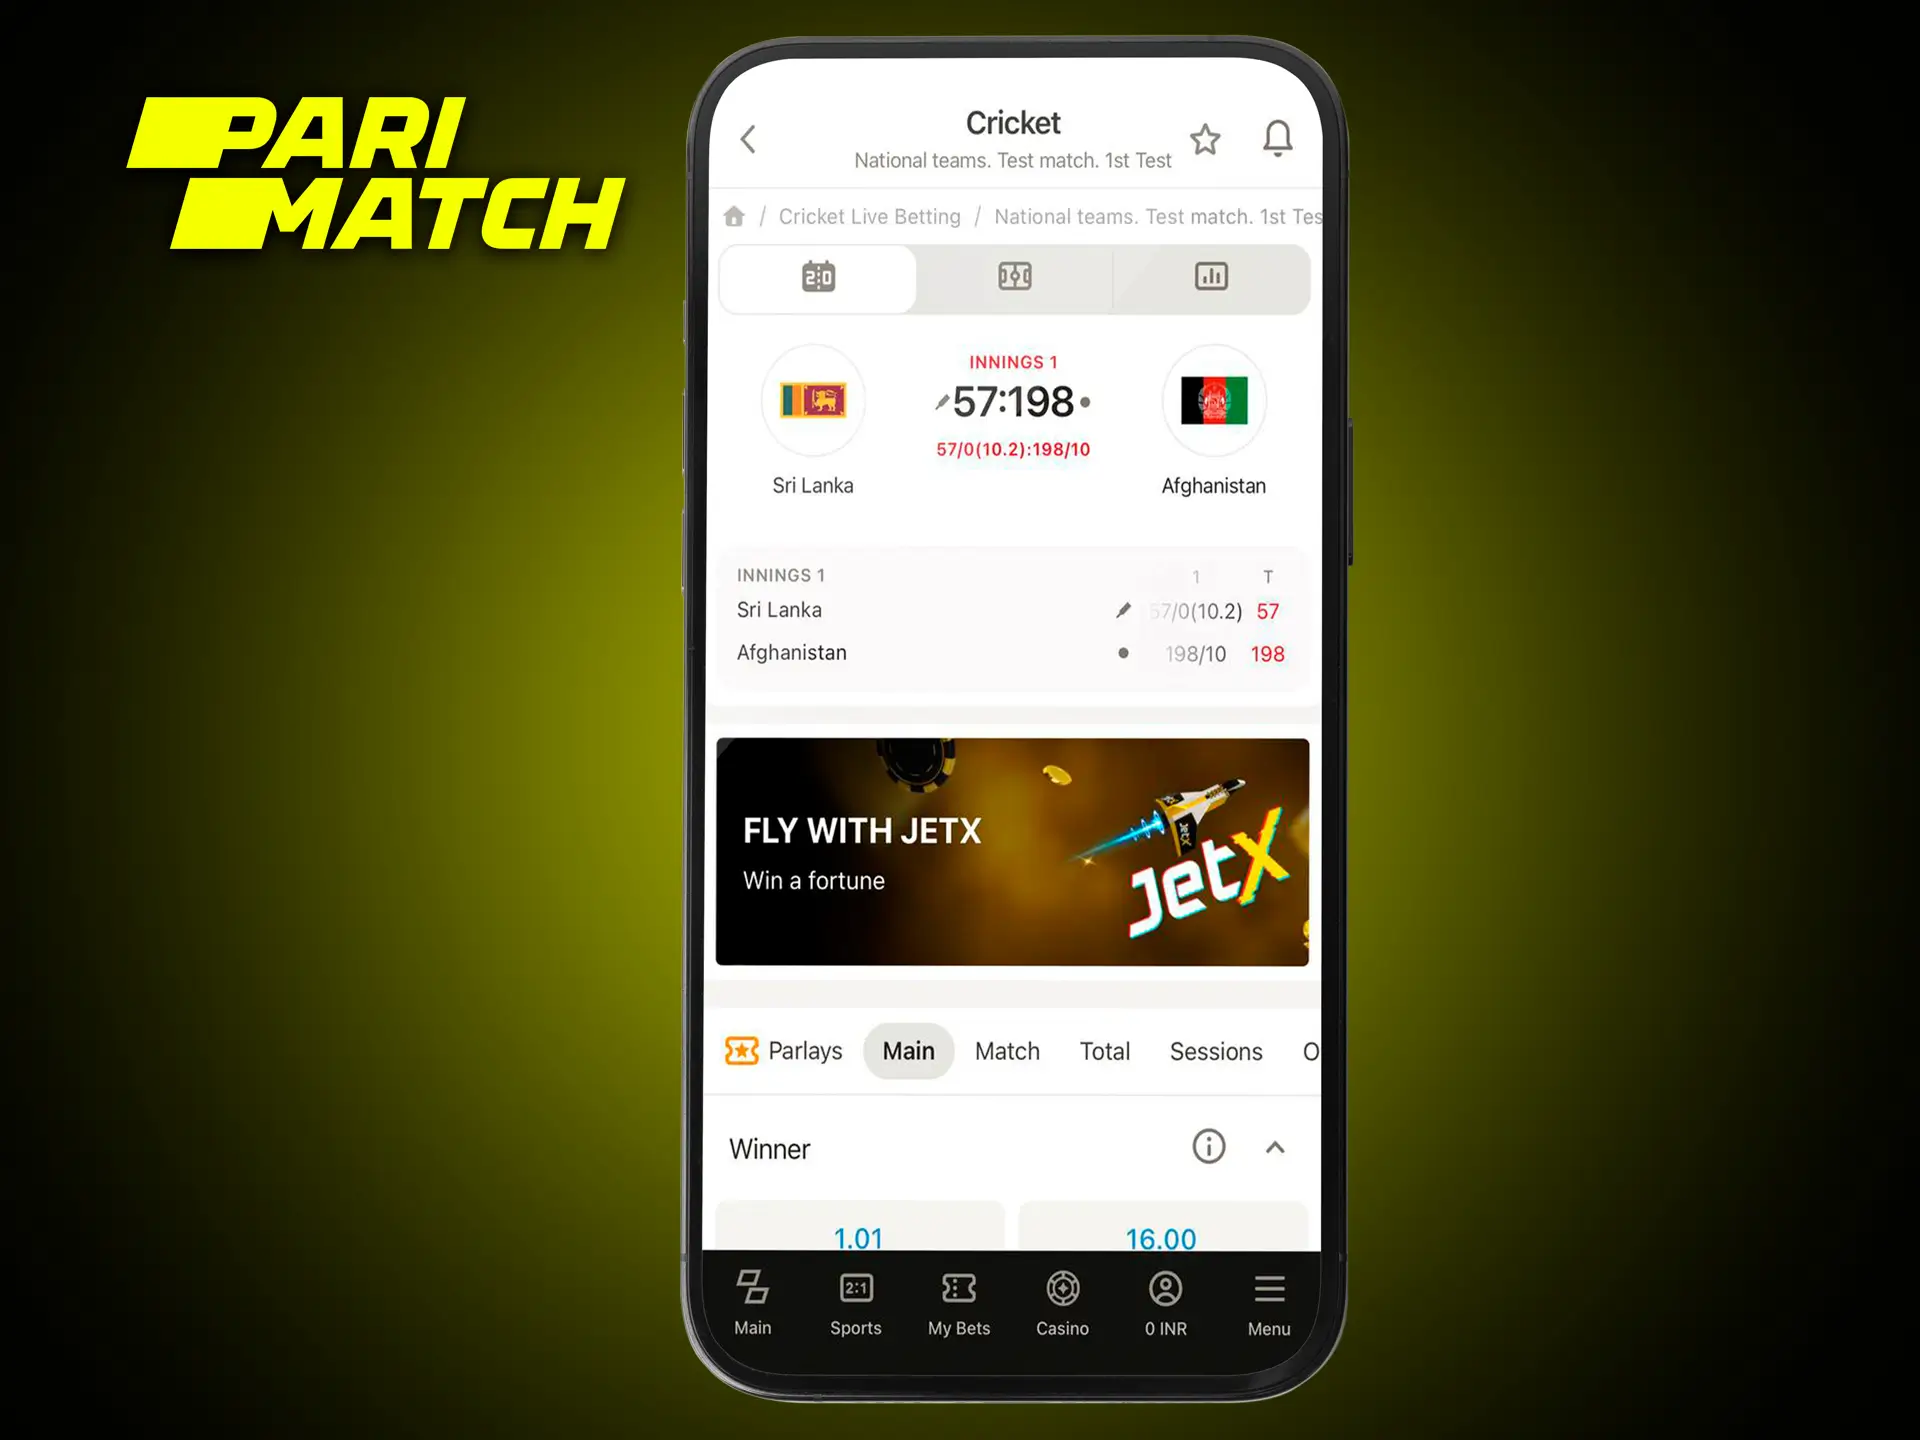 Use your knowledge to figure out which match to bet on at Parimatch.